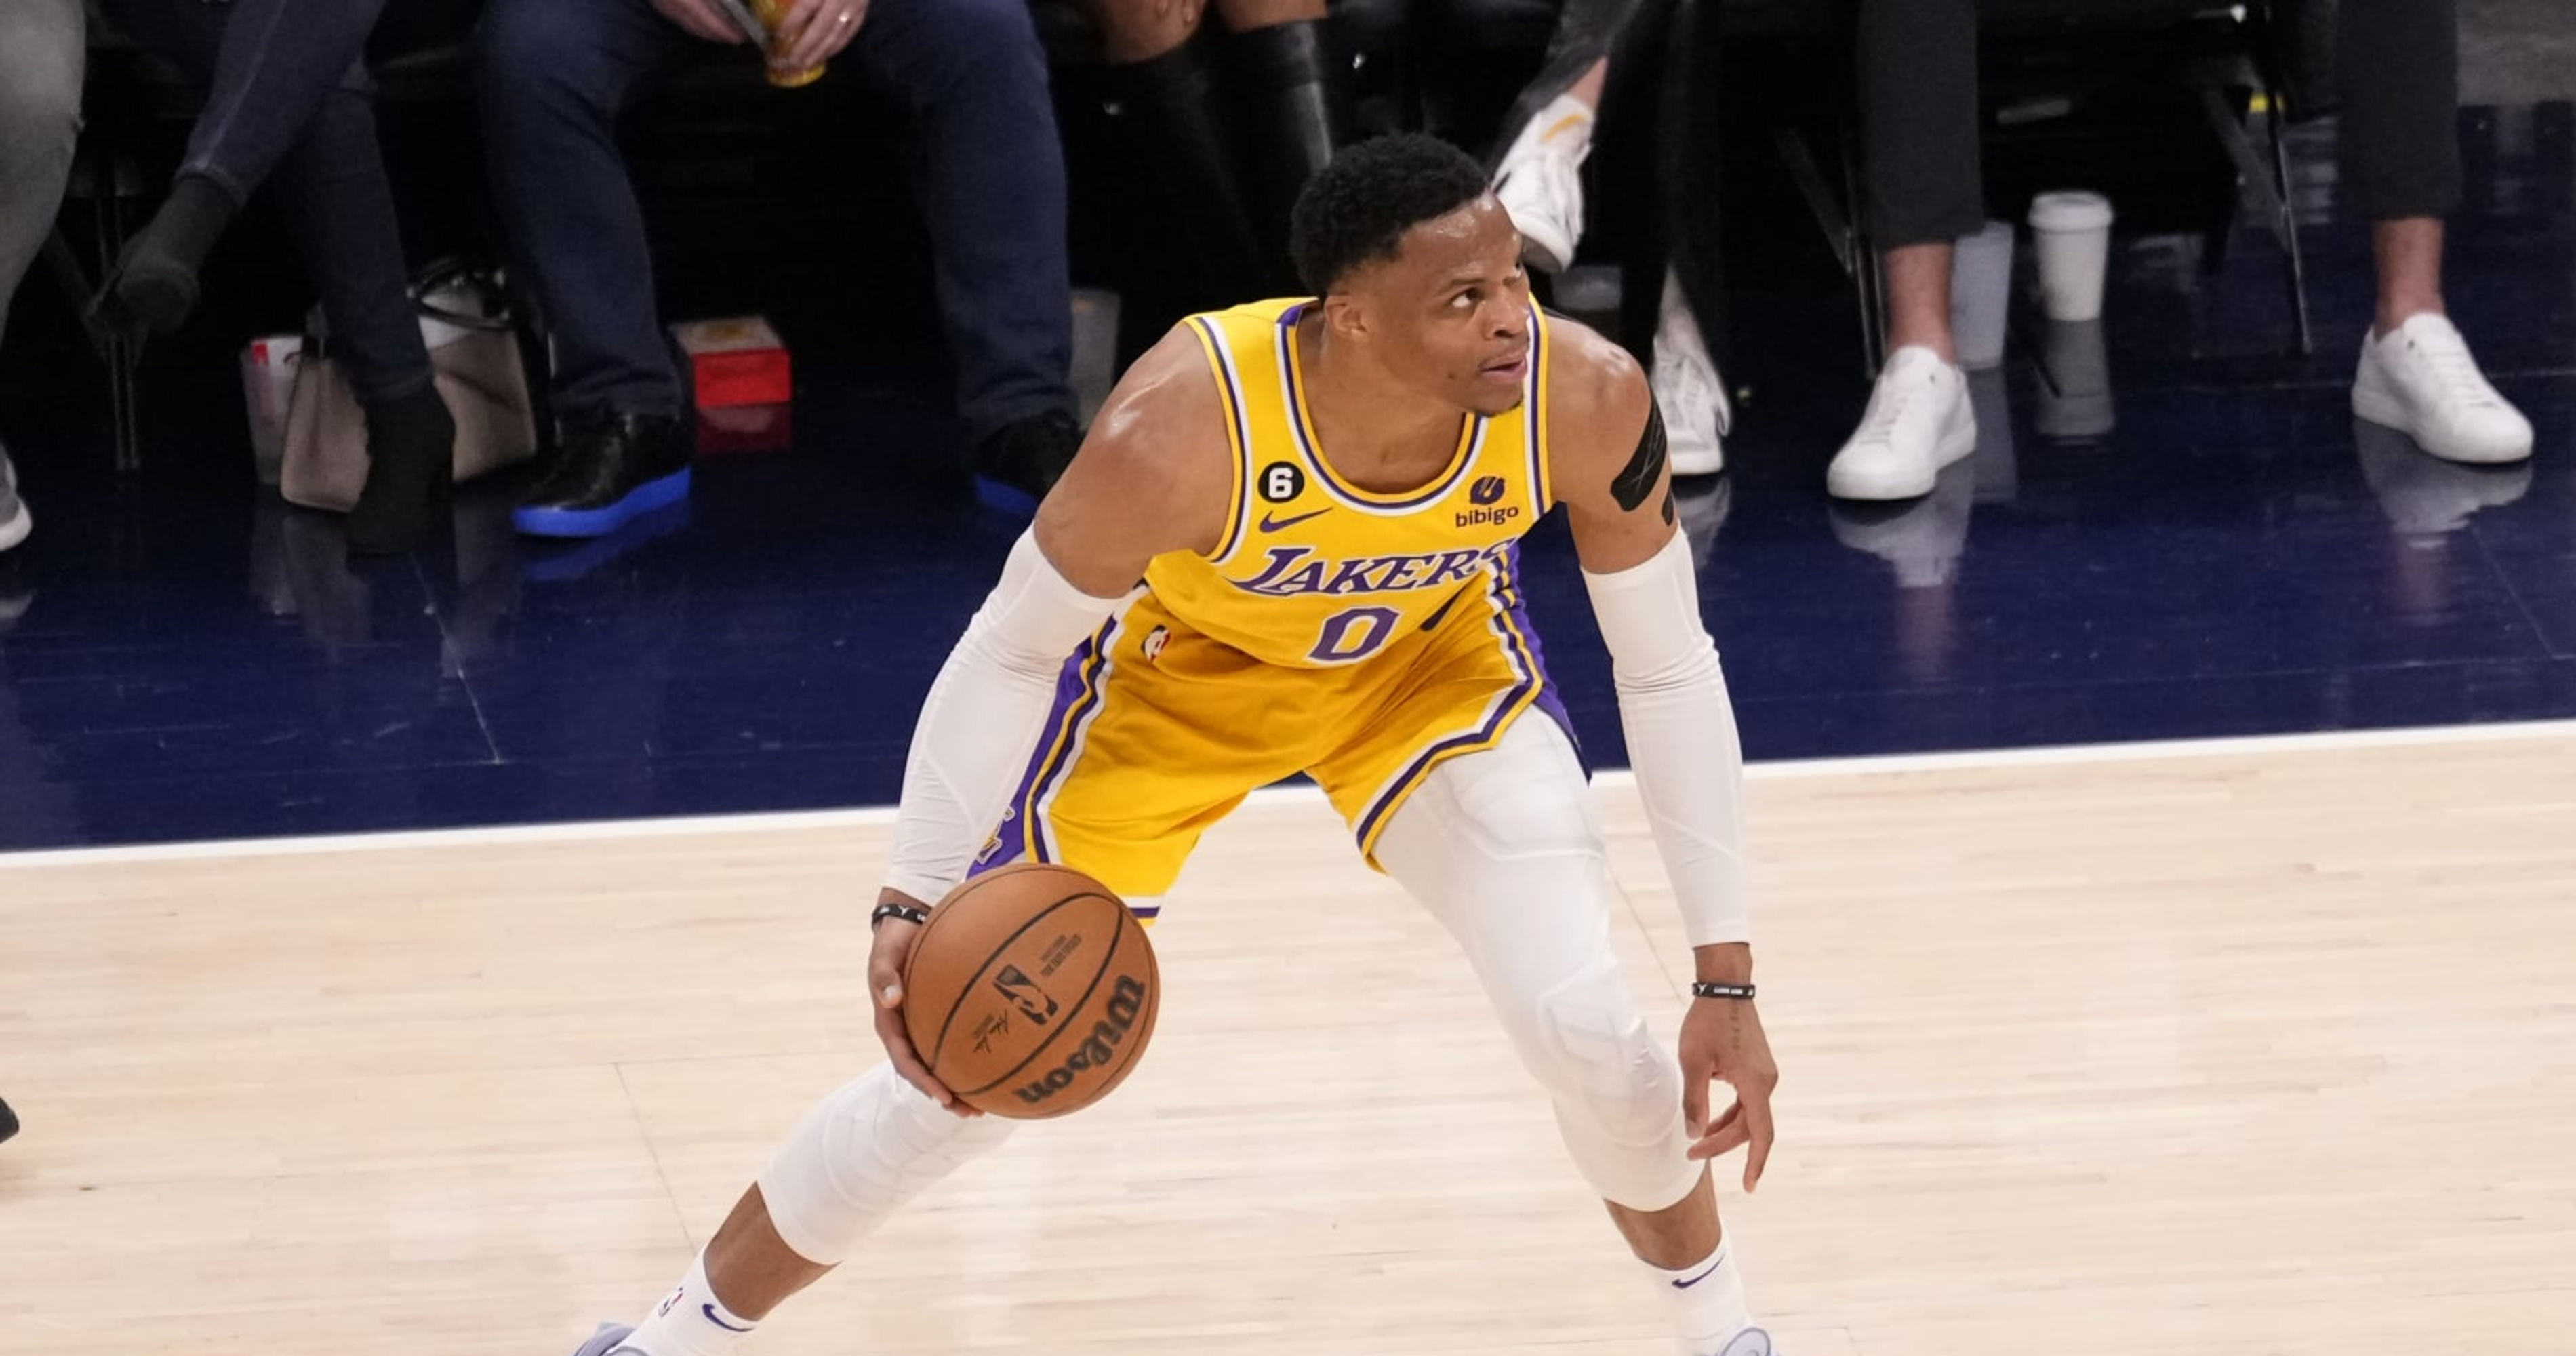 Lakers trade Russell Westbrook to Jazz in deal centered around D